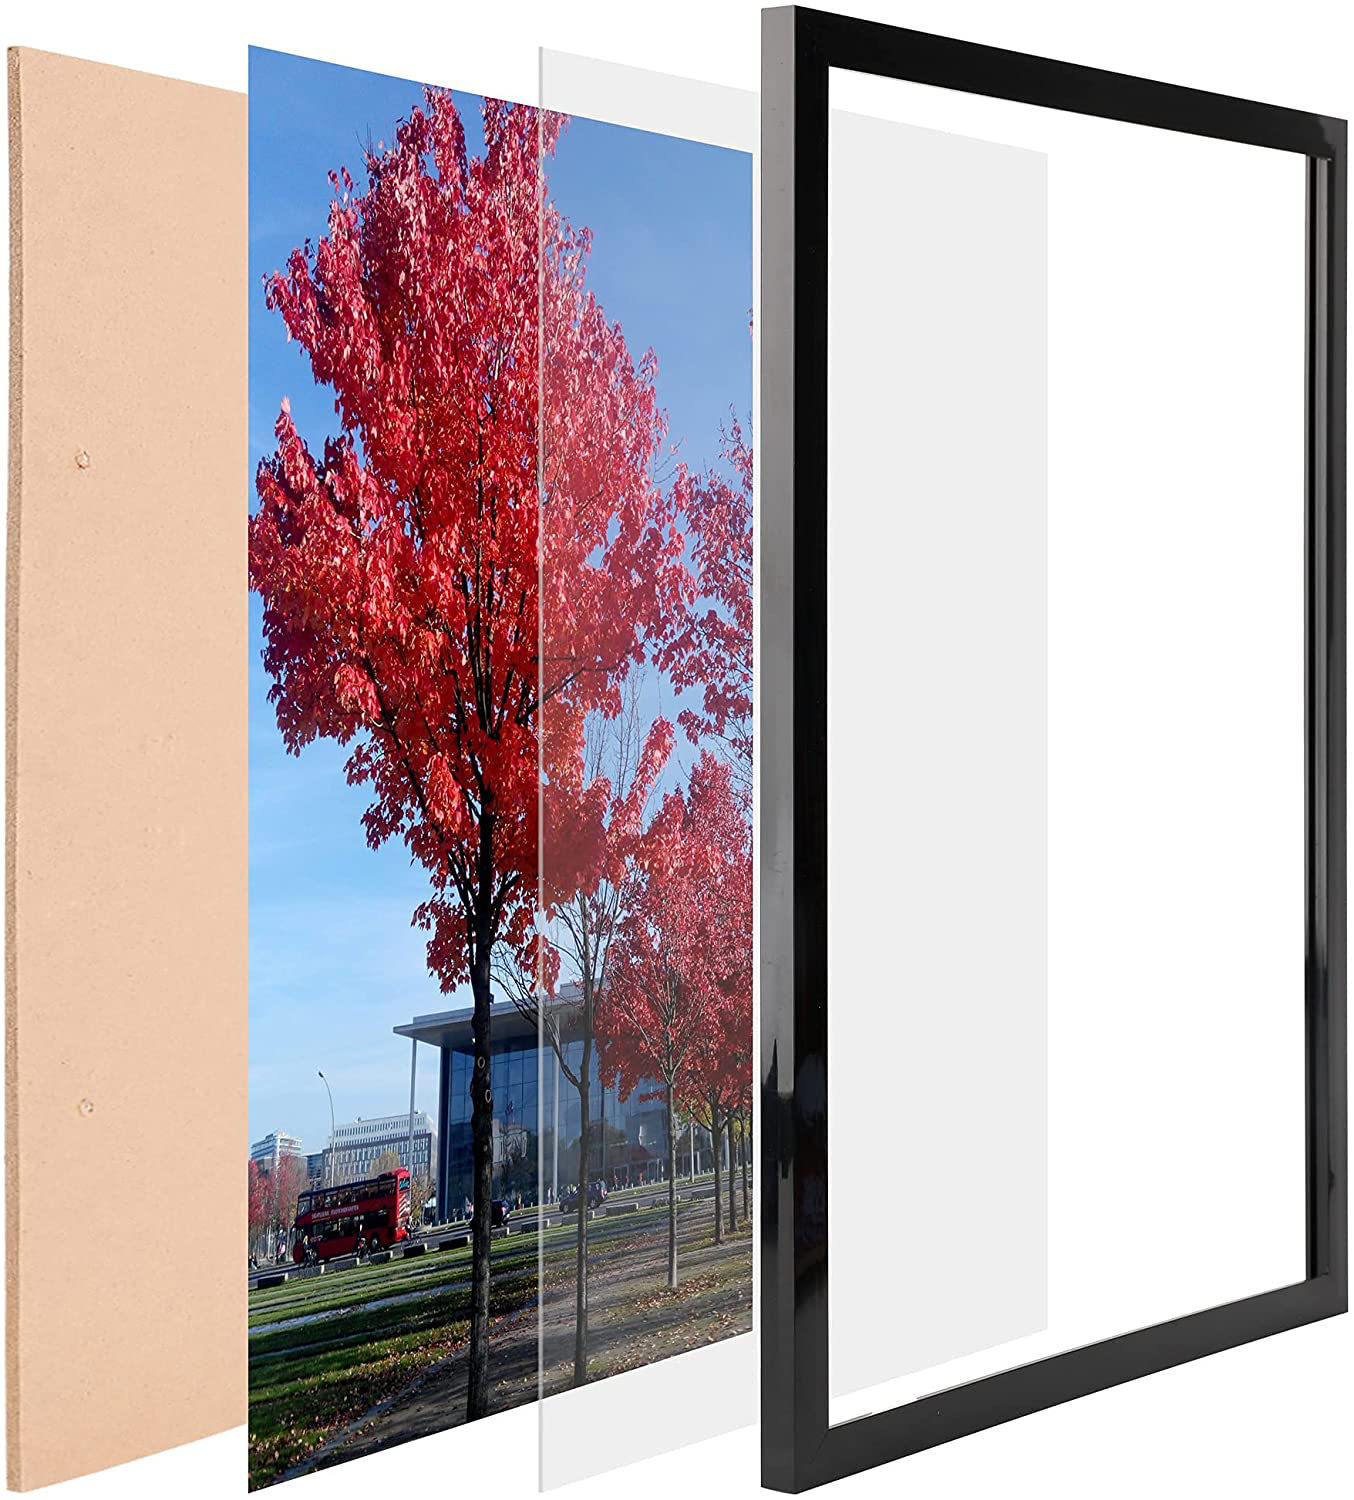 Medog 11 by 17 Picture Frame without Mat to Display picture 11x17 Wall Mounting Document Certificate Frames If Add Mat Can As 11x14 10x14 9x11 10x12 7x11 Picture Frame 11x17